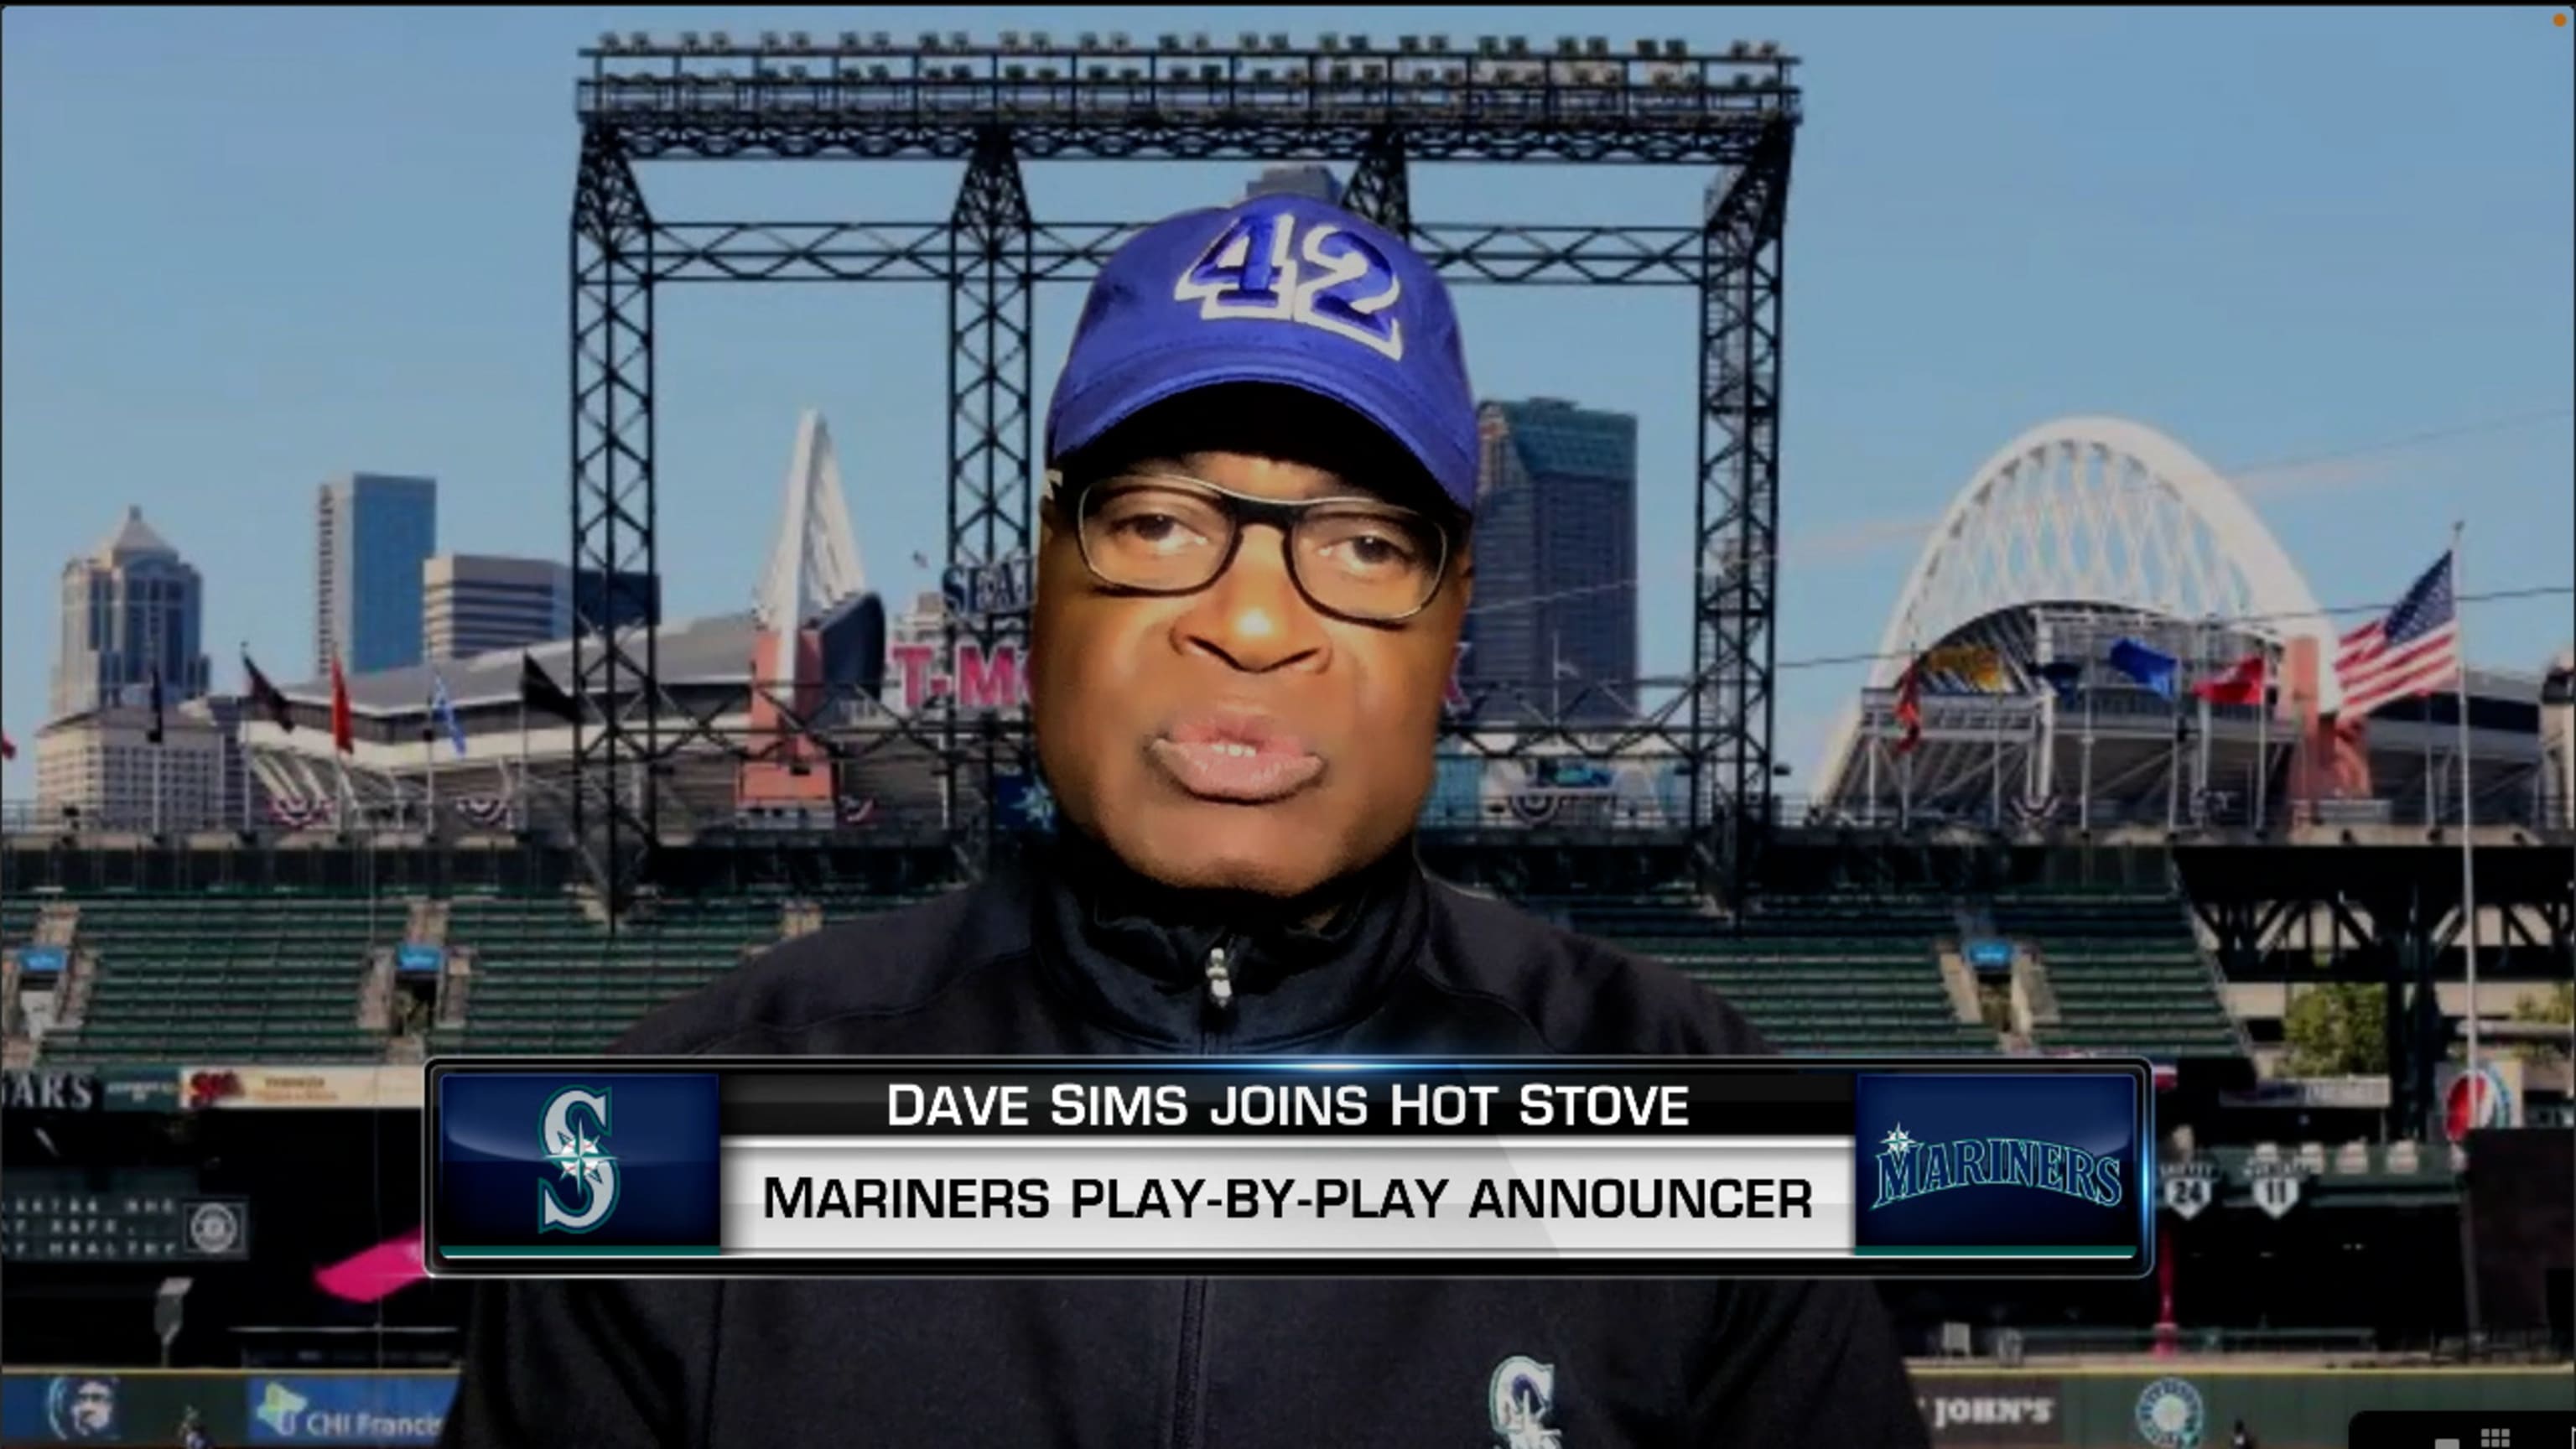 Hello Welcome to the Hot Stove League Mariners Fans